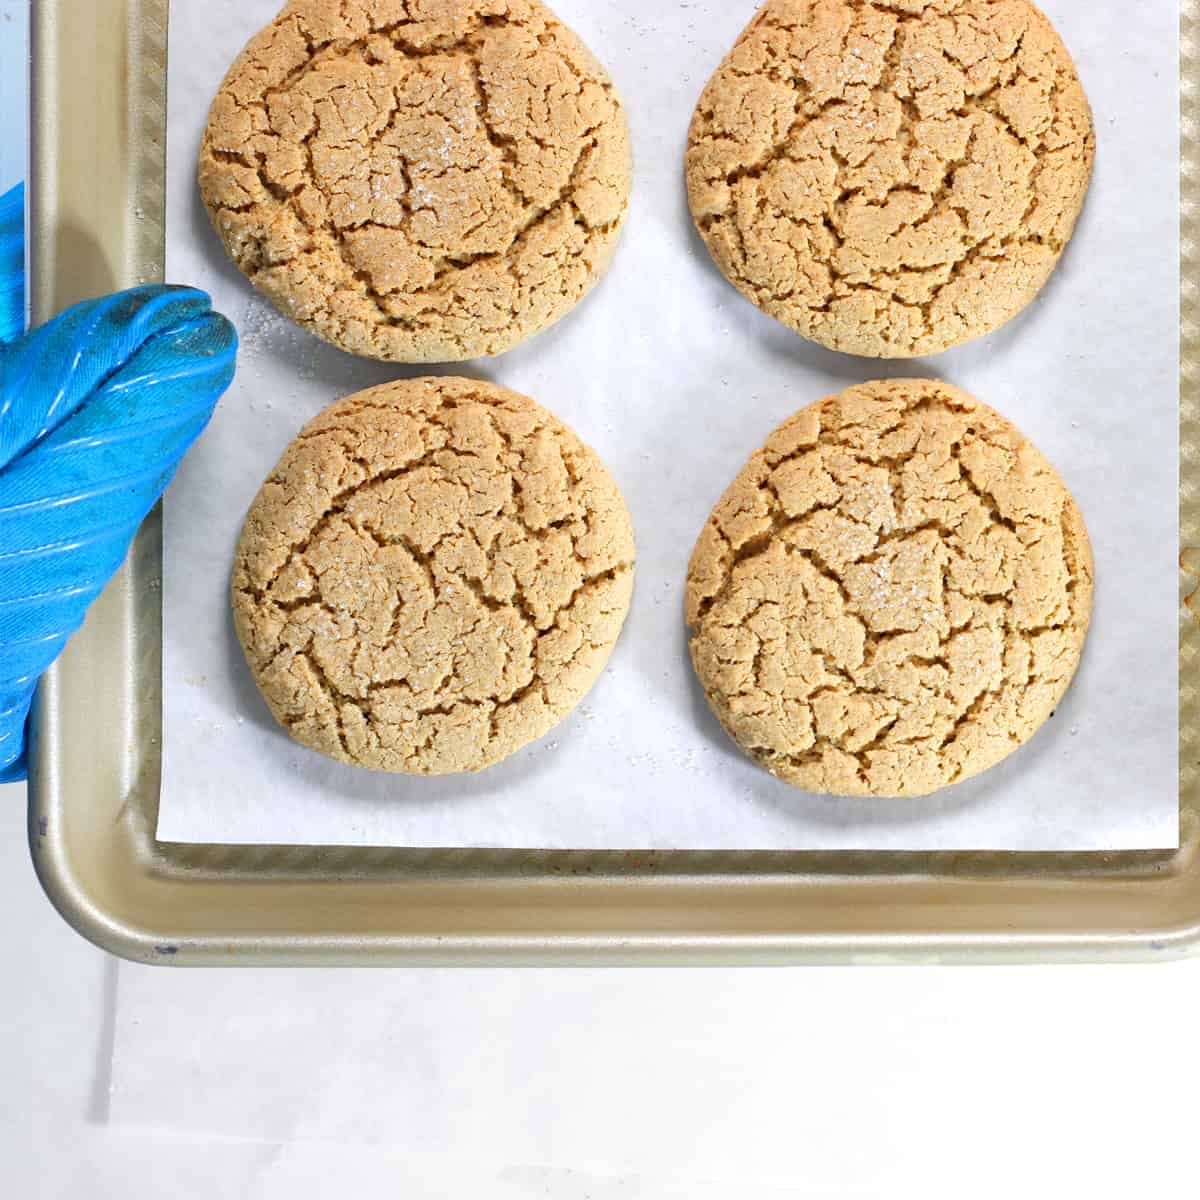 baked healthy sugar cookies on a pan with a glove holding it.